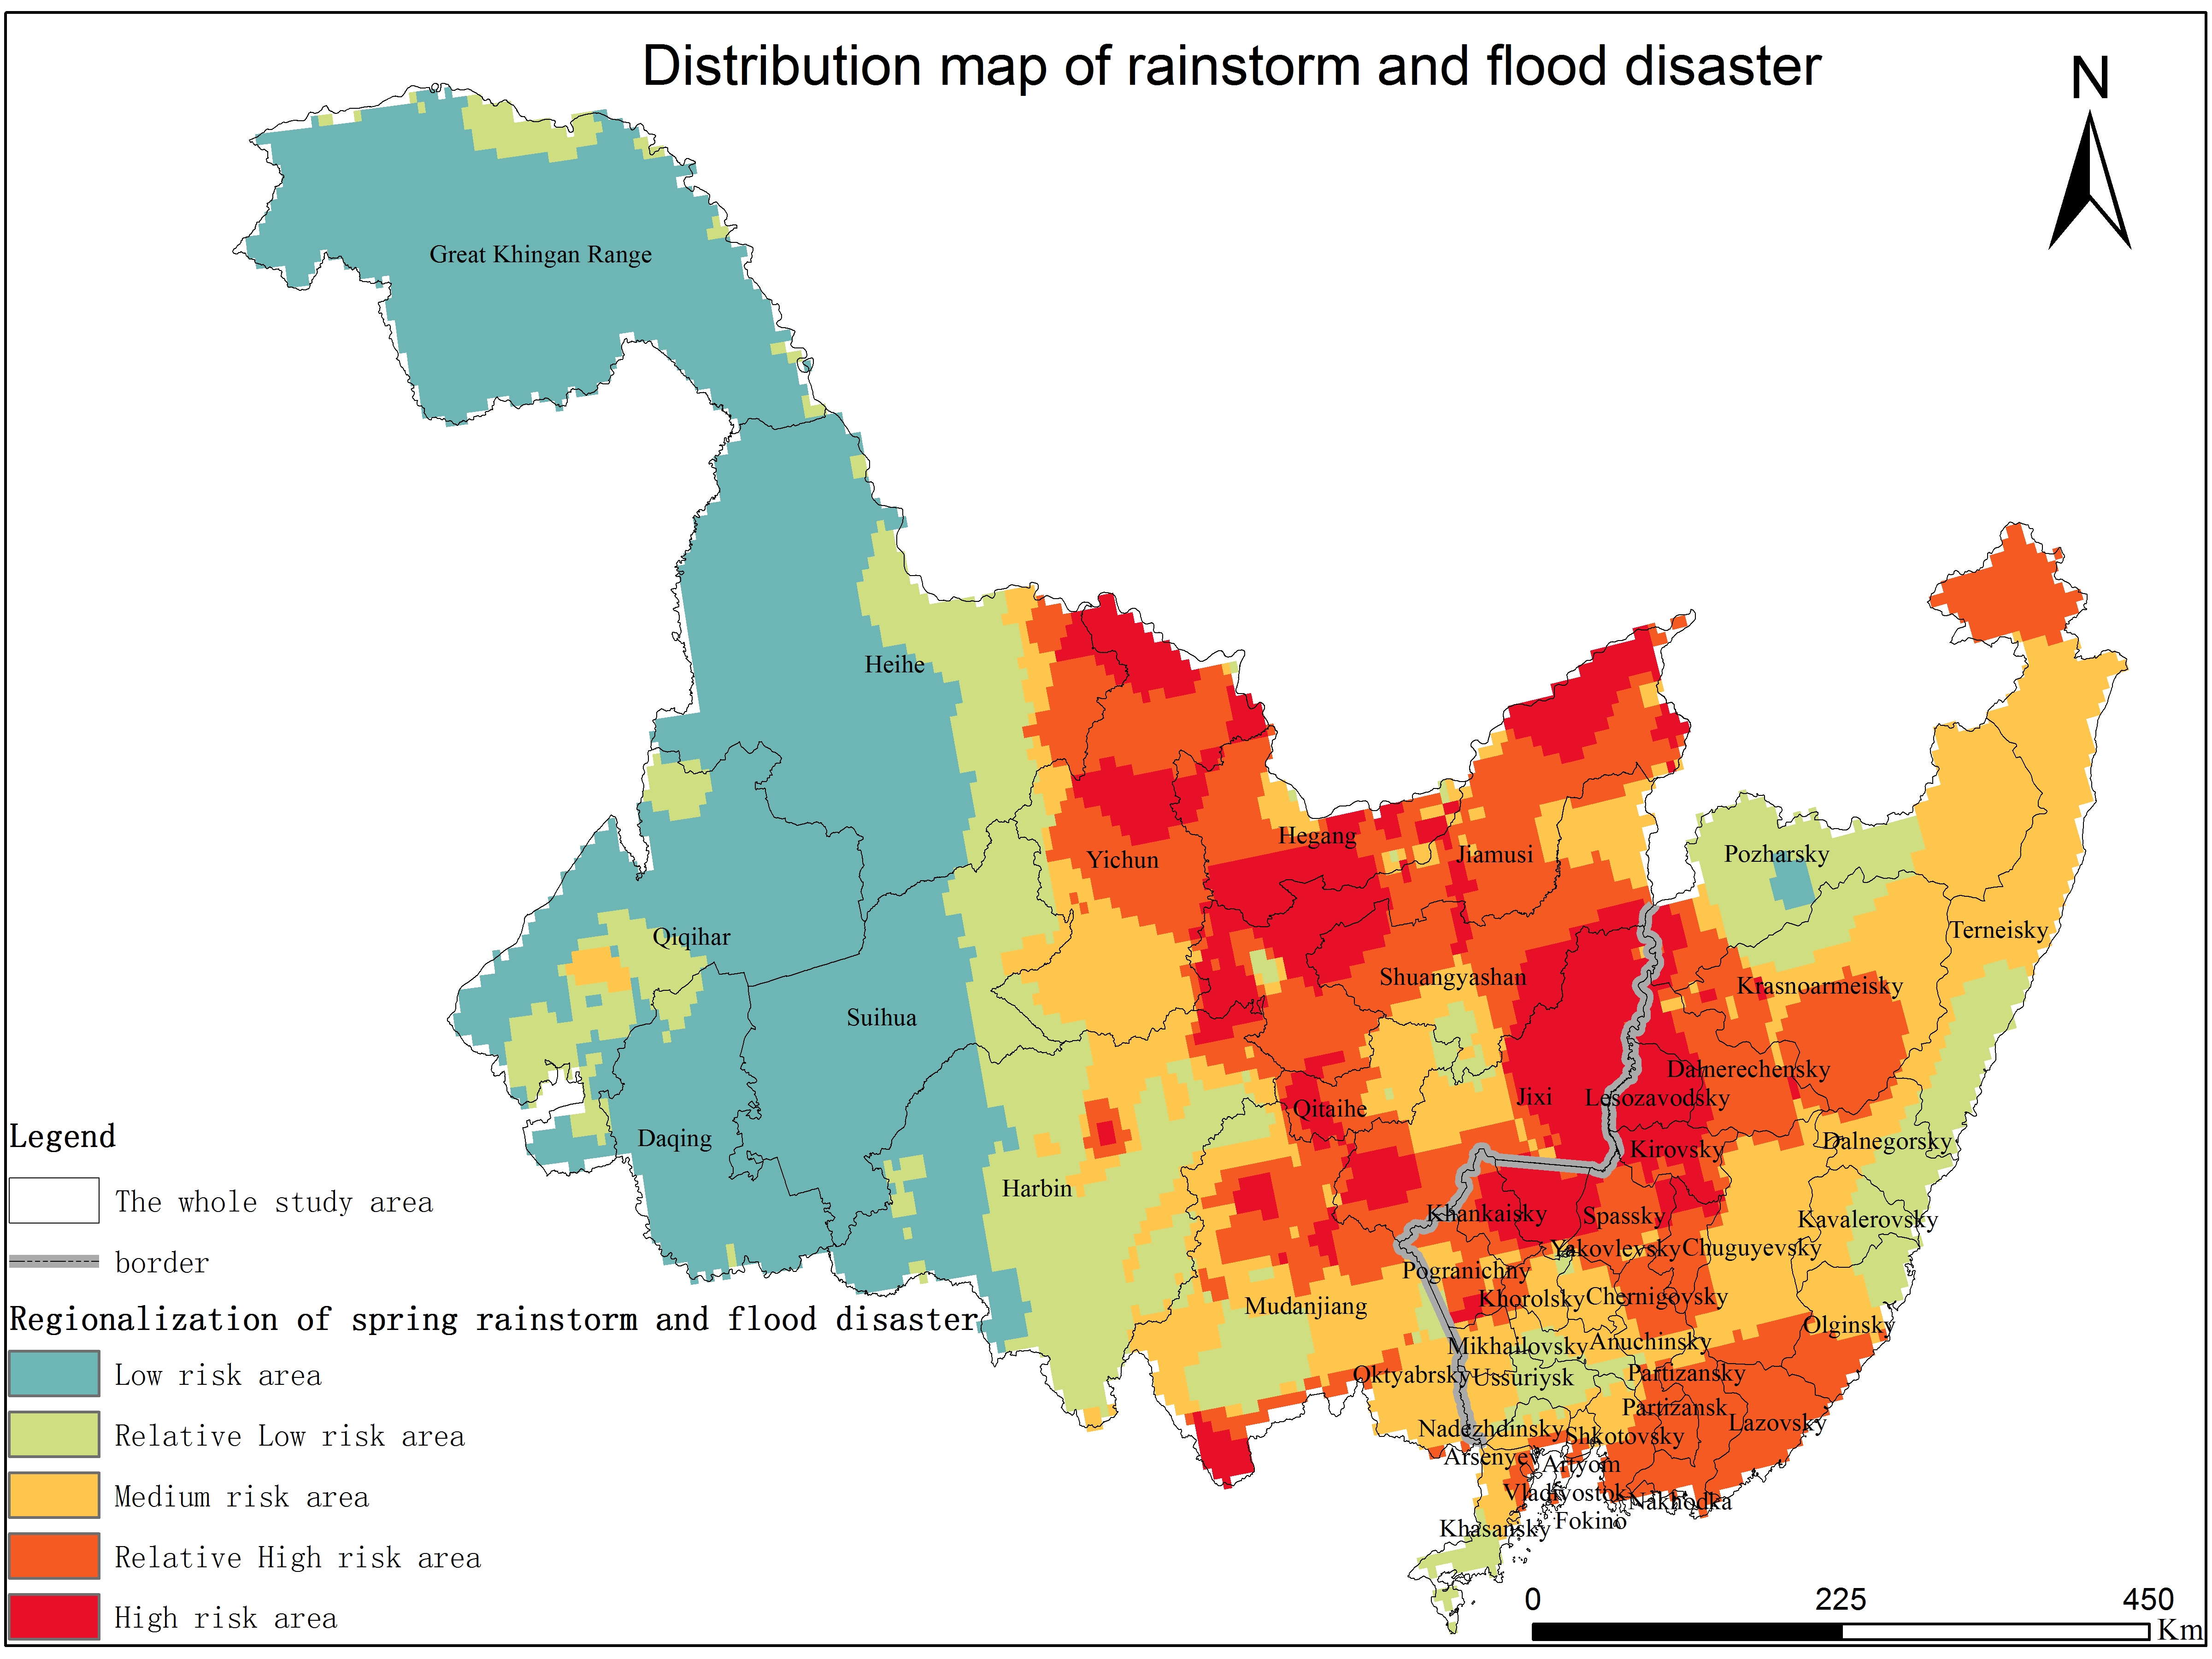 The distribution of rainstorm-flood disaster risk in the cross-border area between China and Russia